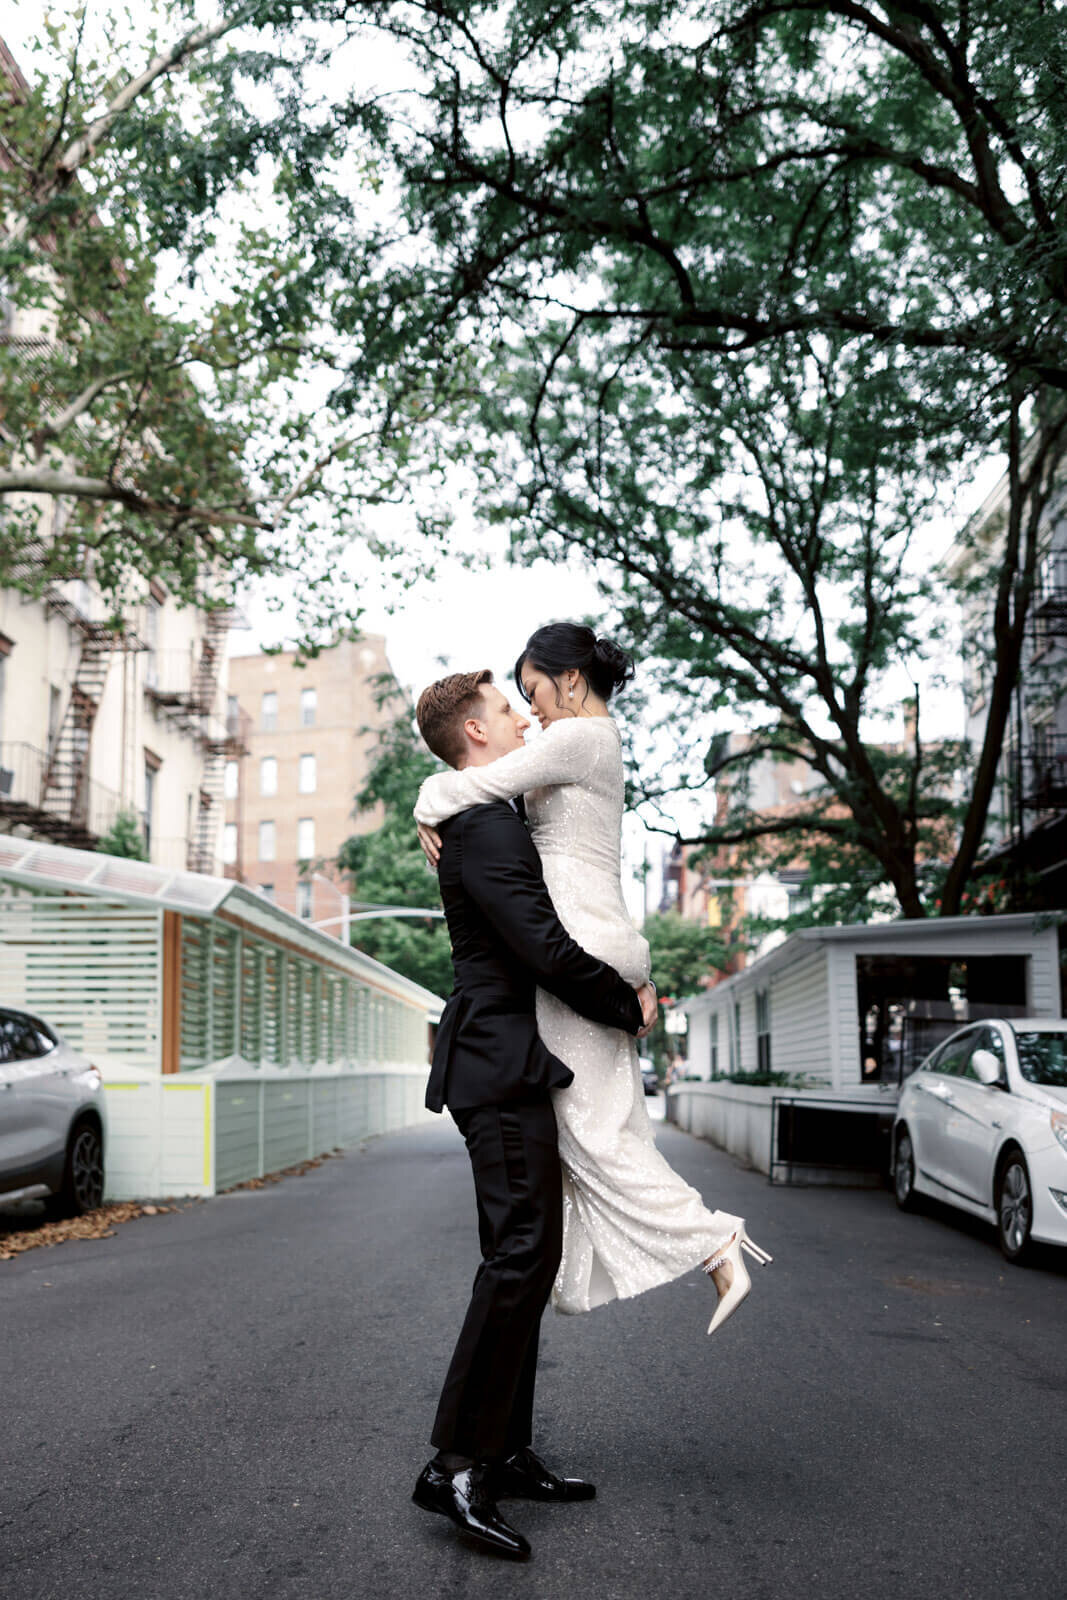 The groom is lovingly carrying the bride in the middle of a street in West Village, NYC. Image by Jenny Fu Studio